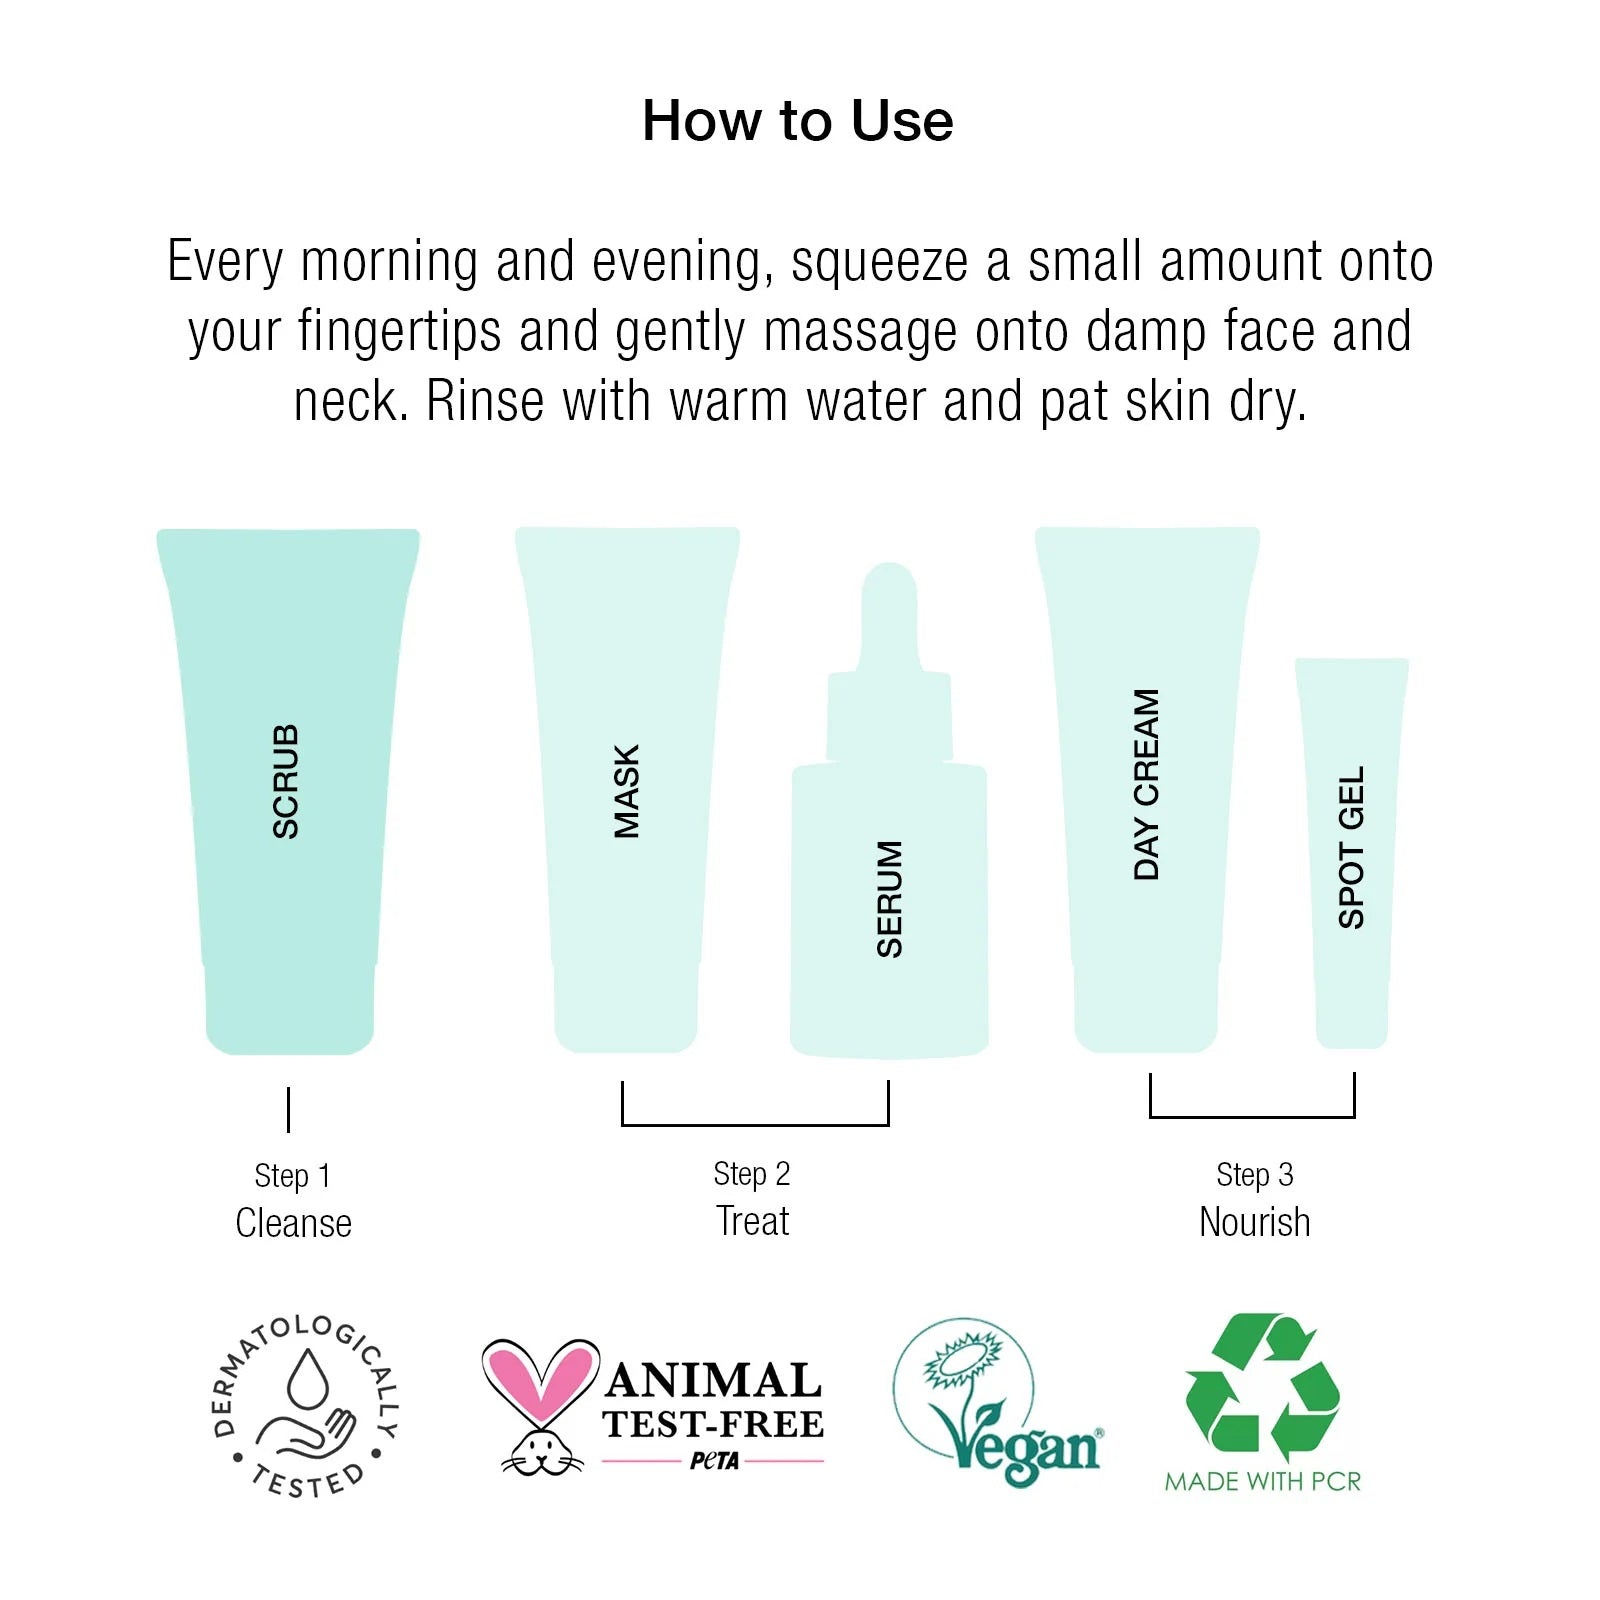 super-facialist-clear-skin-daily-exfoliator-how-to-use-infographic_סבון פילינג מטהר איך להשתמש